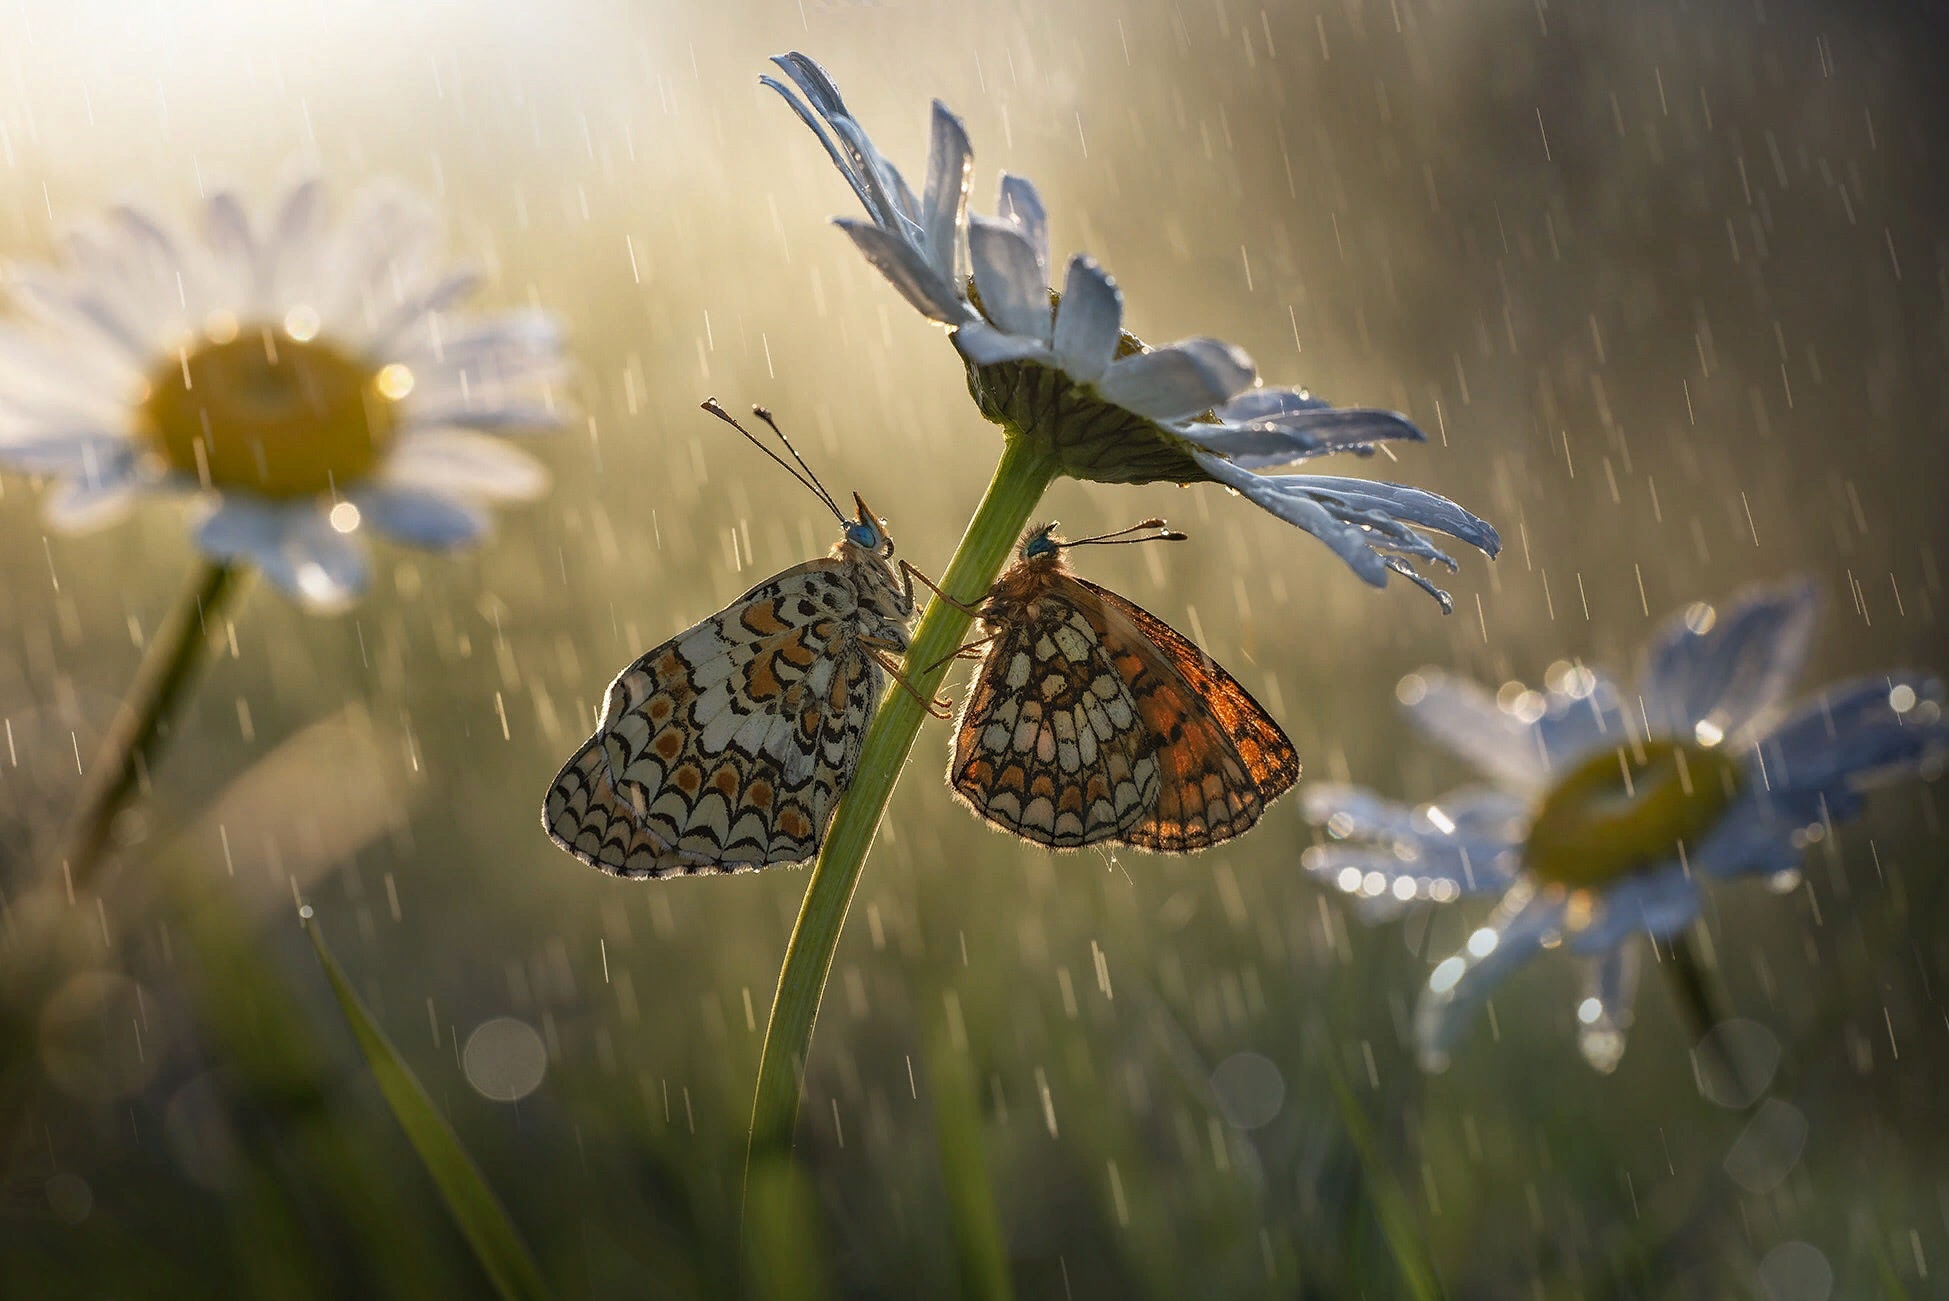 Download PC Wallpaper animal, butterfly, chamomile, flower, insect, macro, nature, rain